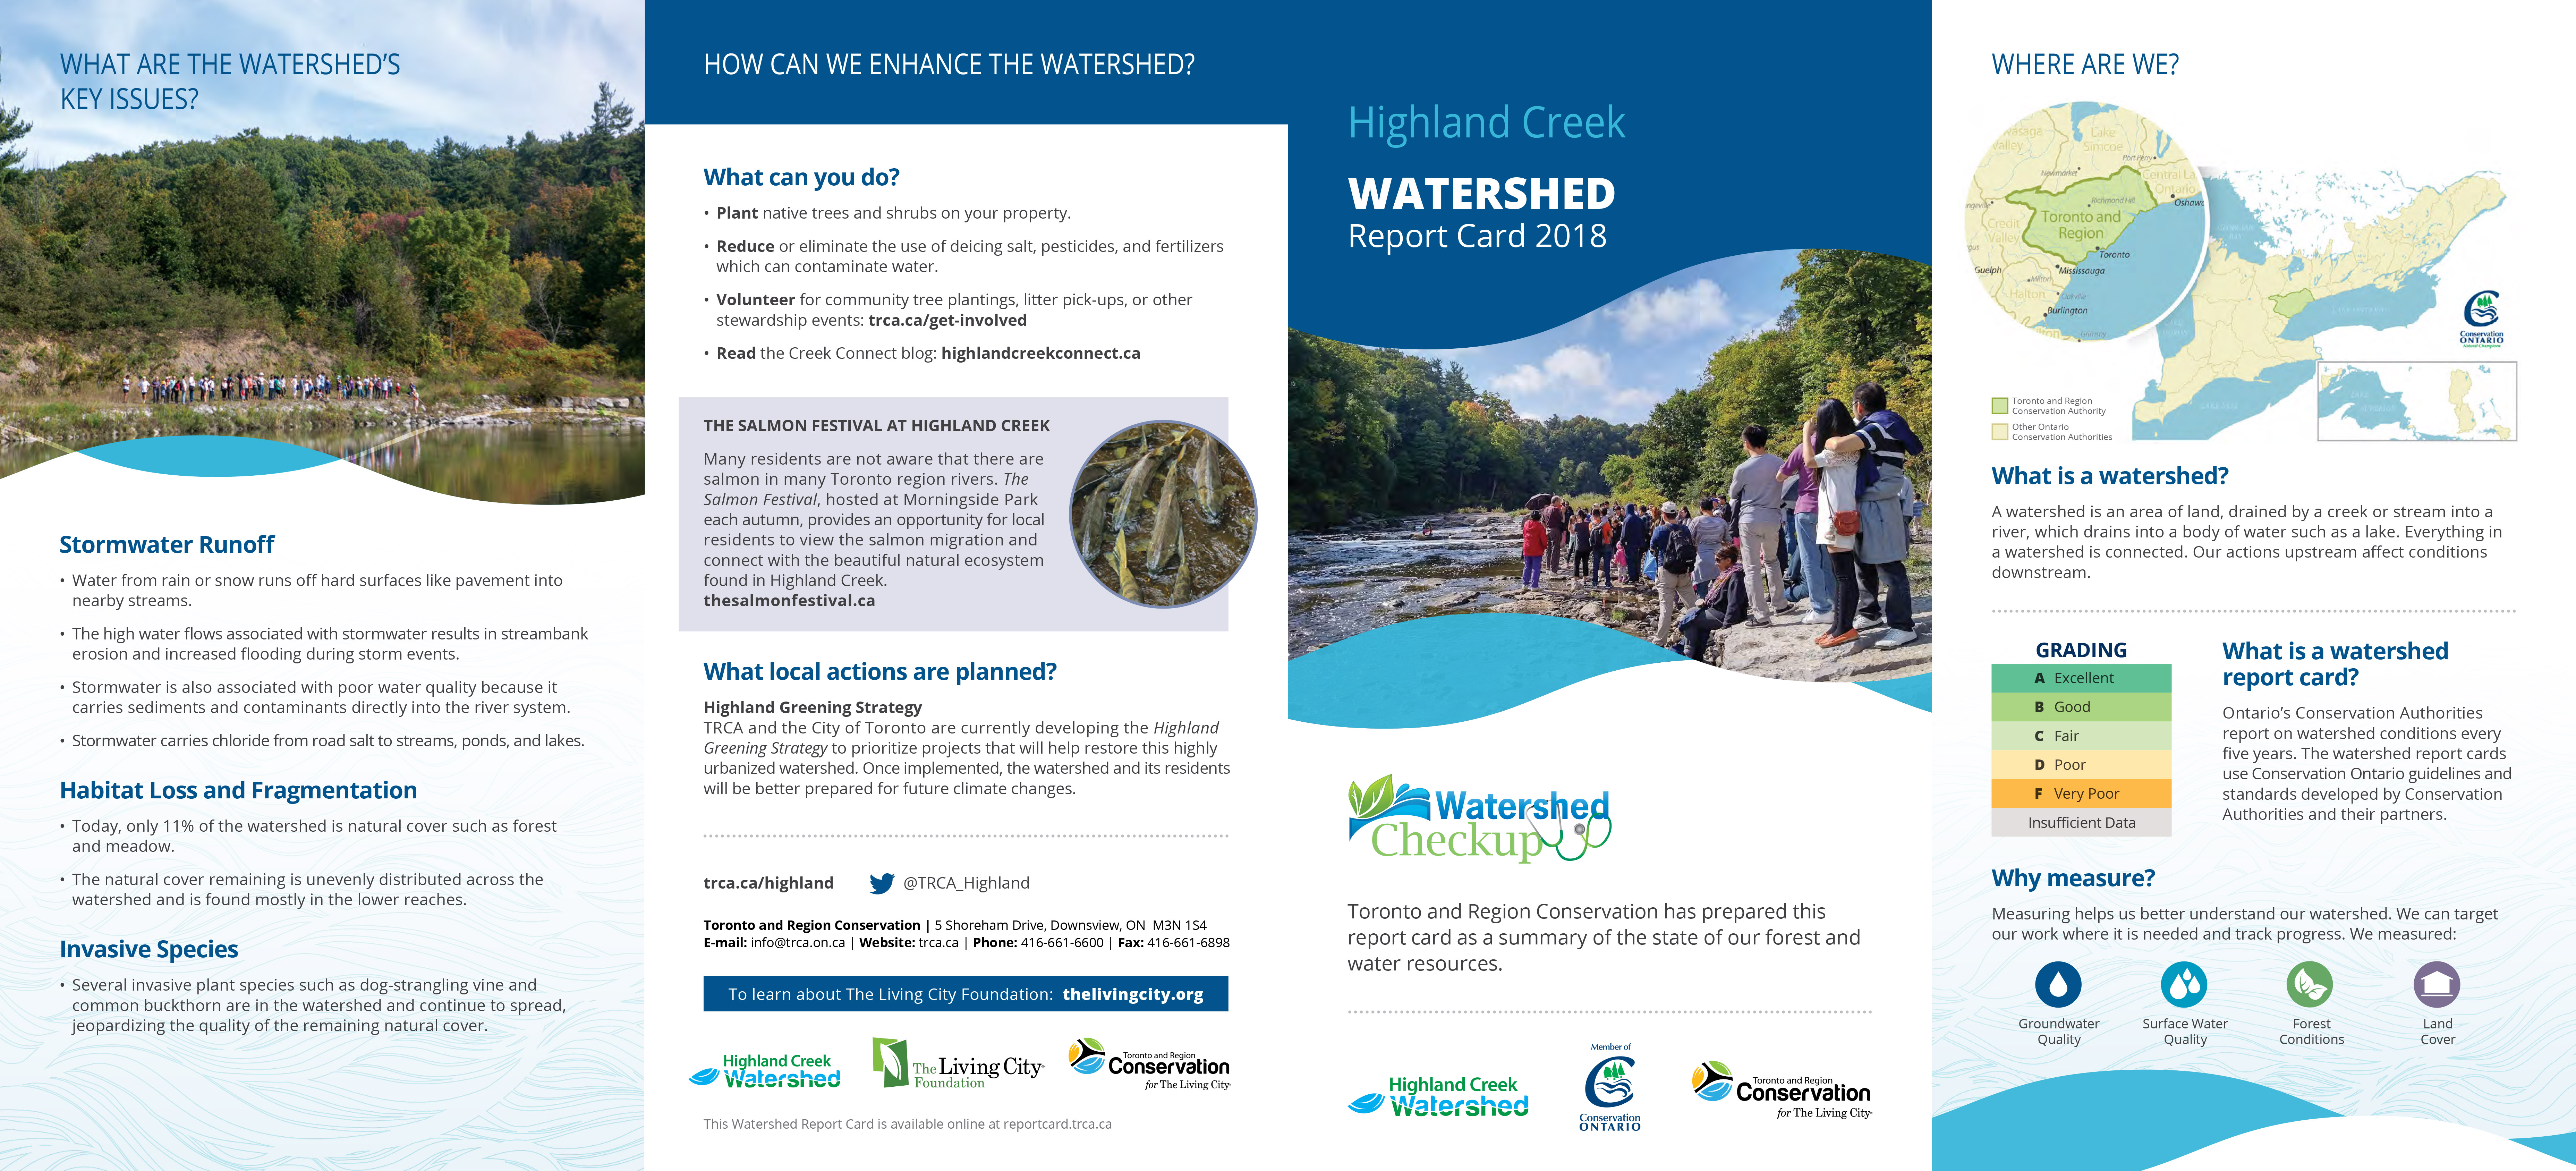 Highland Creek Watershed Report Card